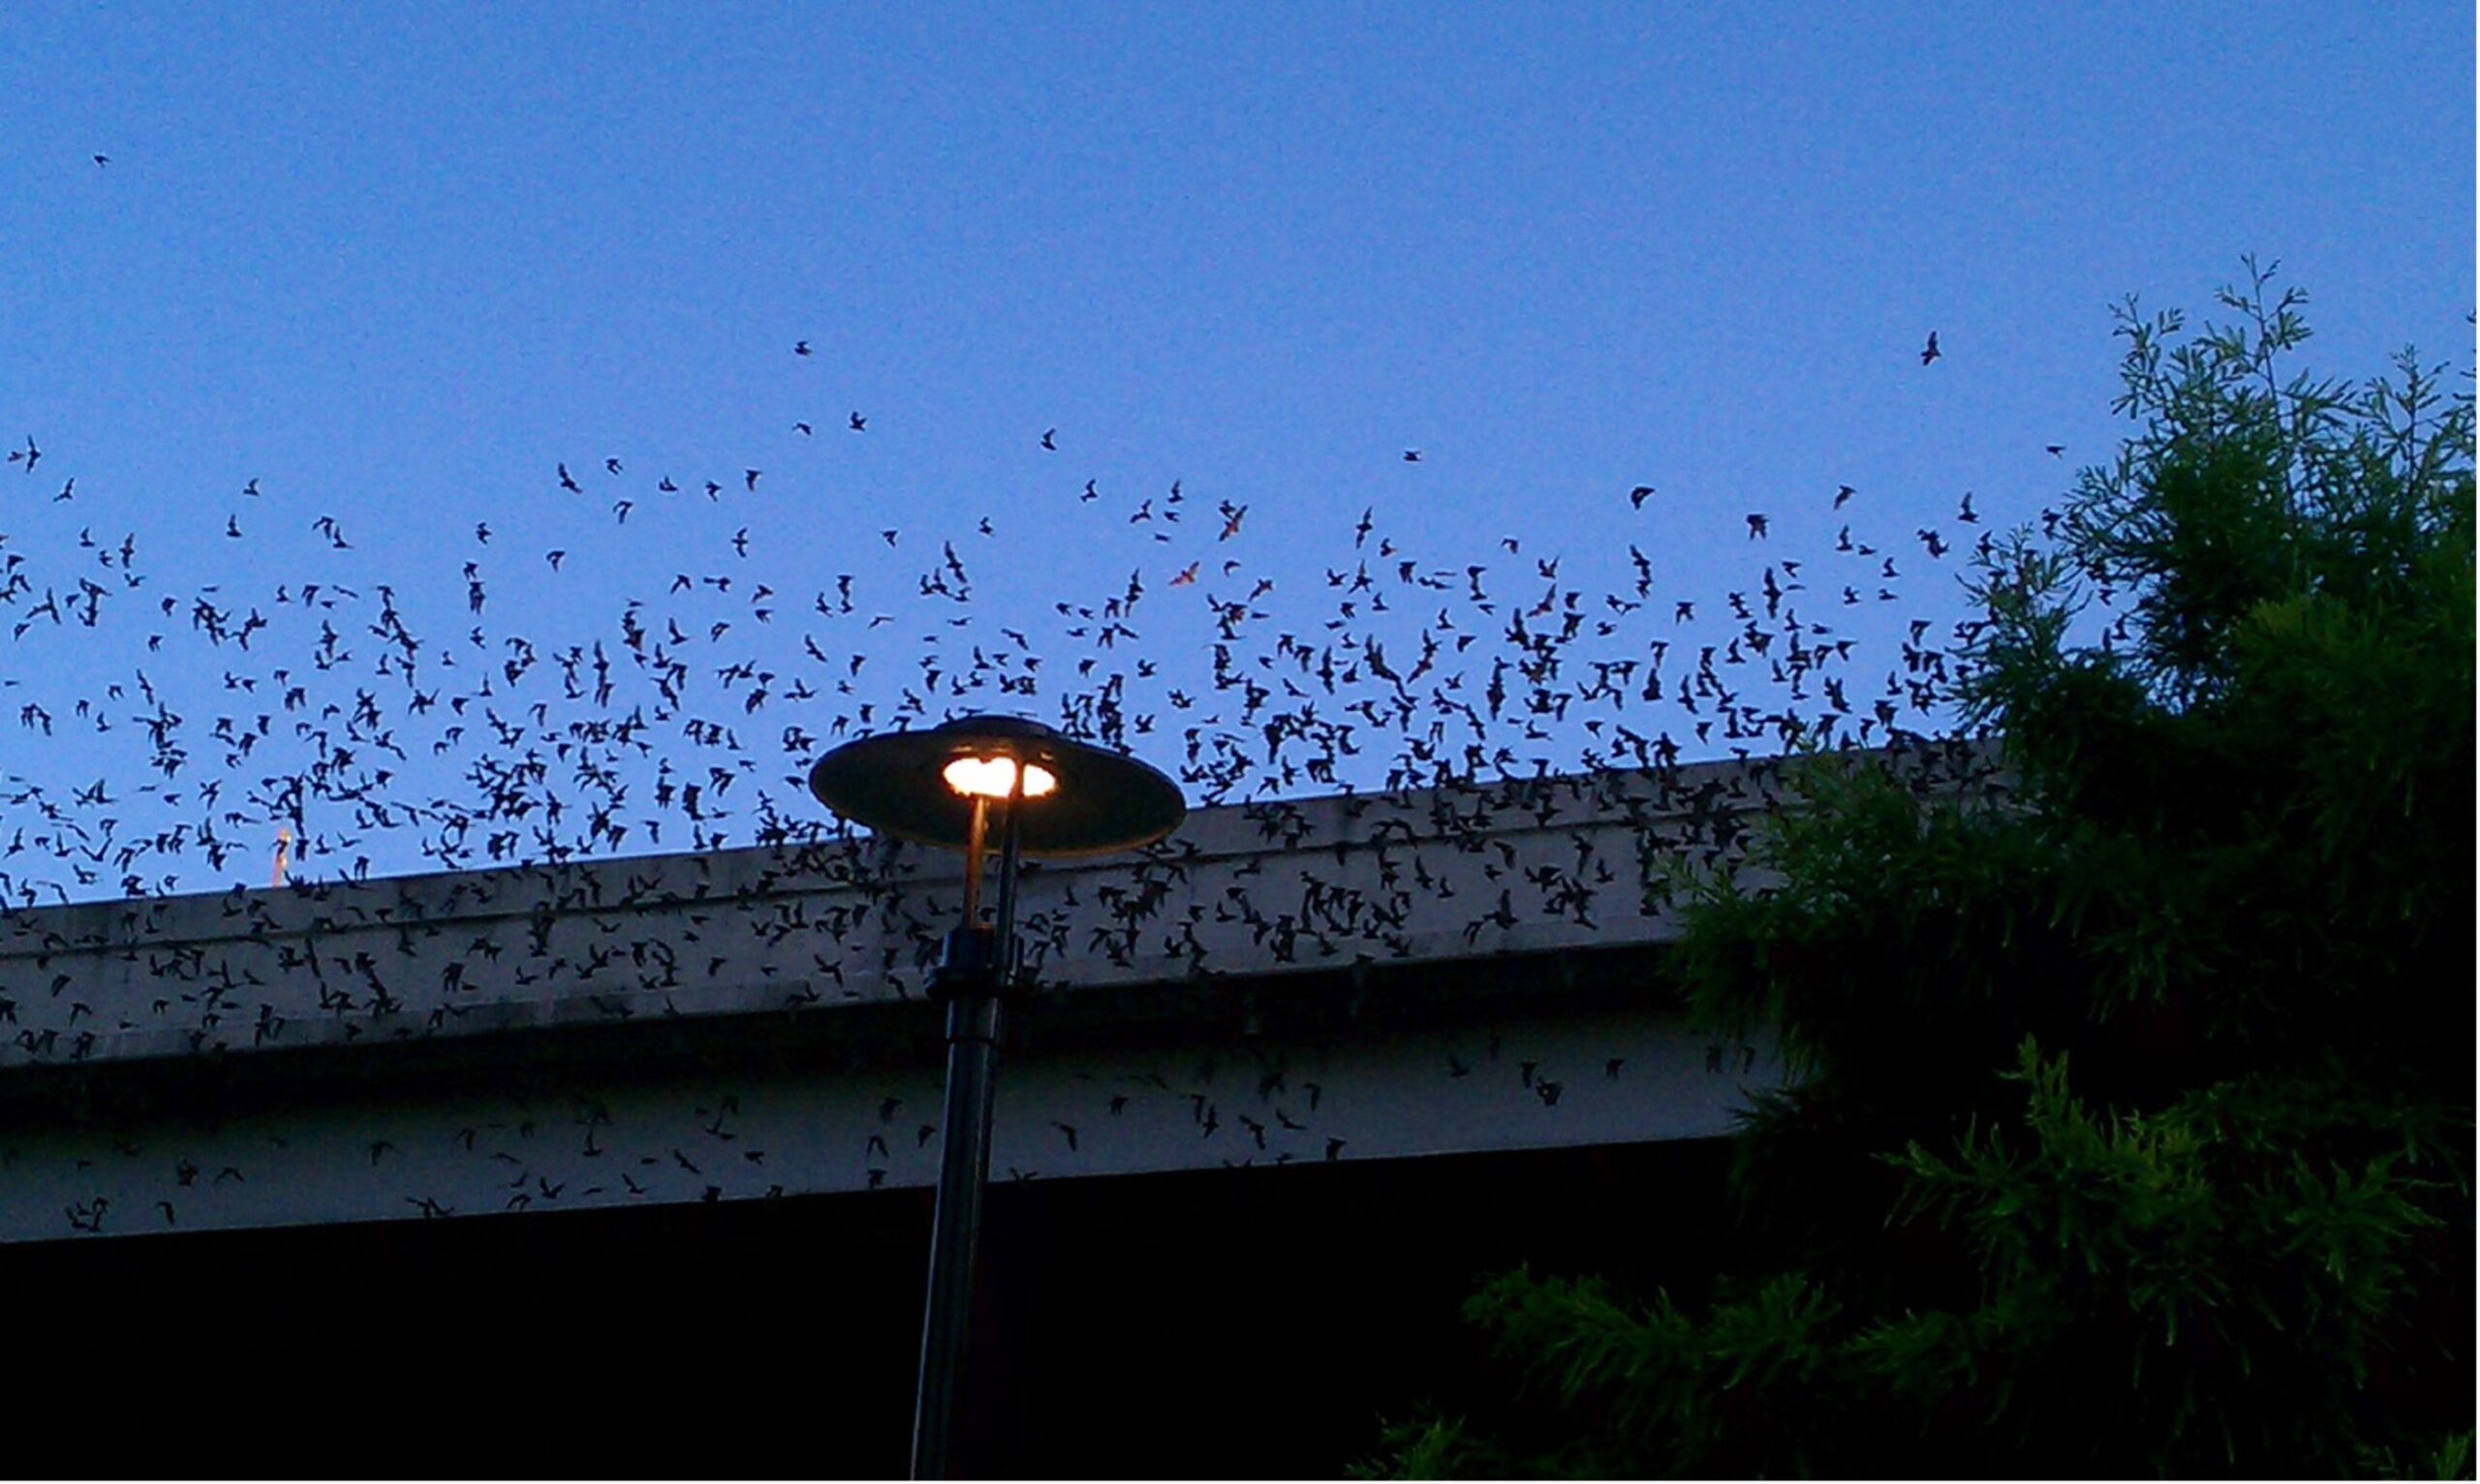 Mexican free tail bats emerging from under the highway as night approaches.